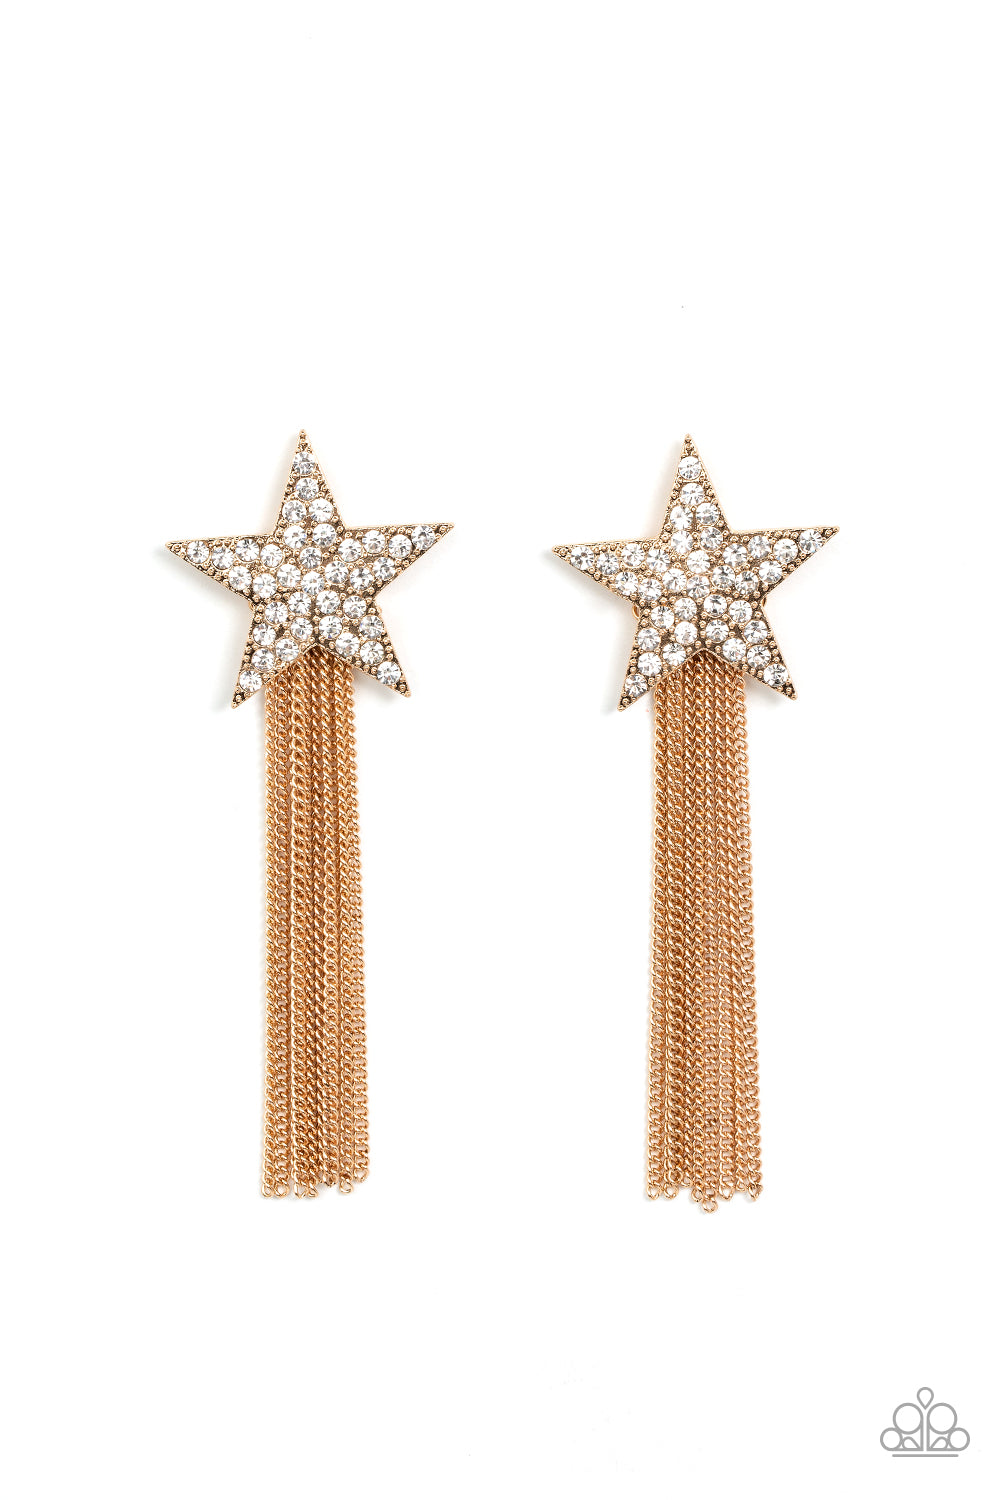 Superstar Solo Gold Star Post Earring - Paparazzi Accessories  A curtain of gold chains streams out from the bottom of an oversized gold star encrusted in blinding white rhinestones, resulting in a stellar tassel. Earring attaches to a standard post fitting.  Sold as one pair of post earrings.